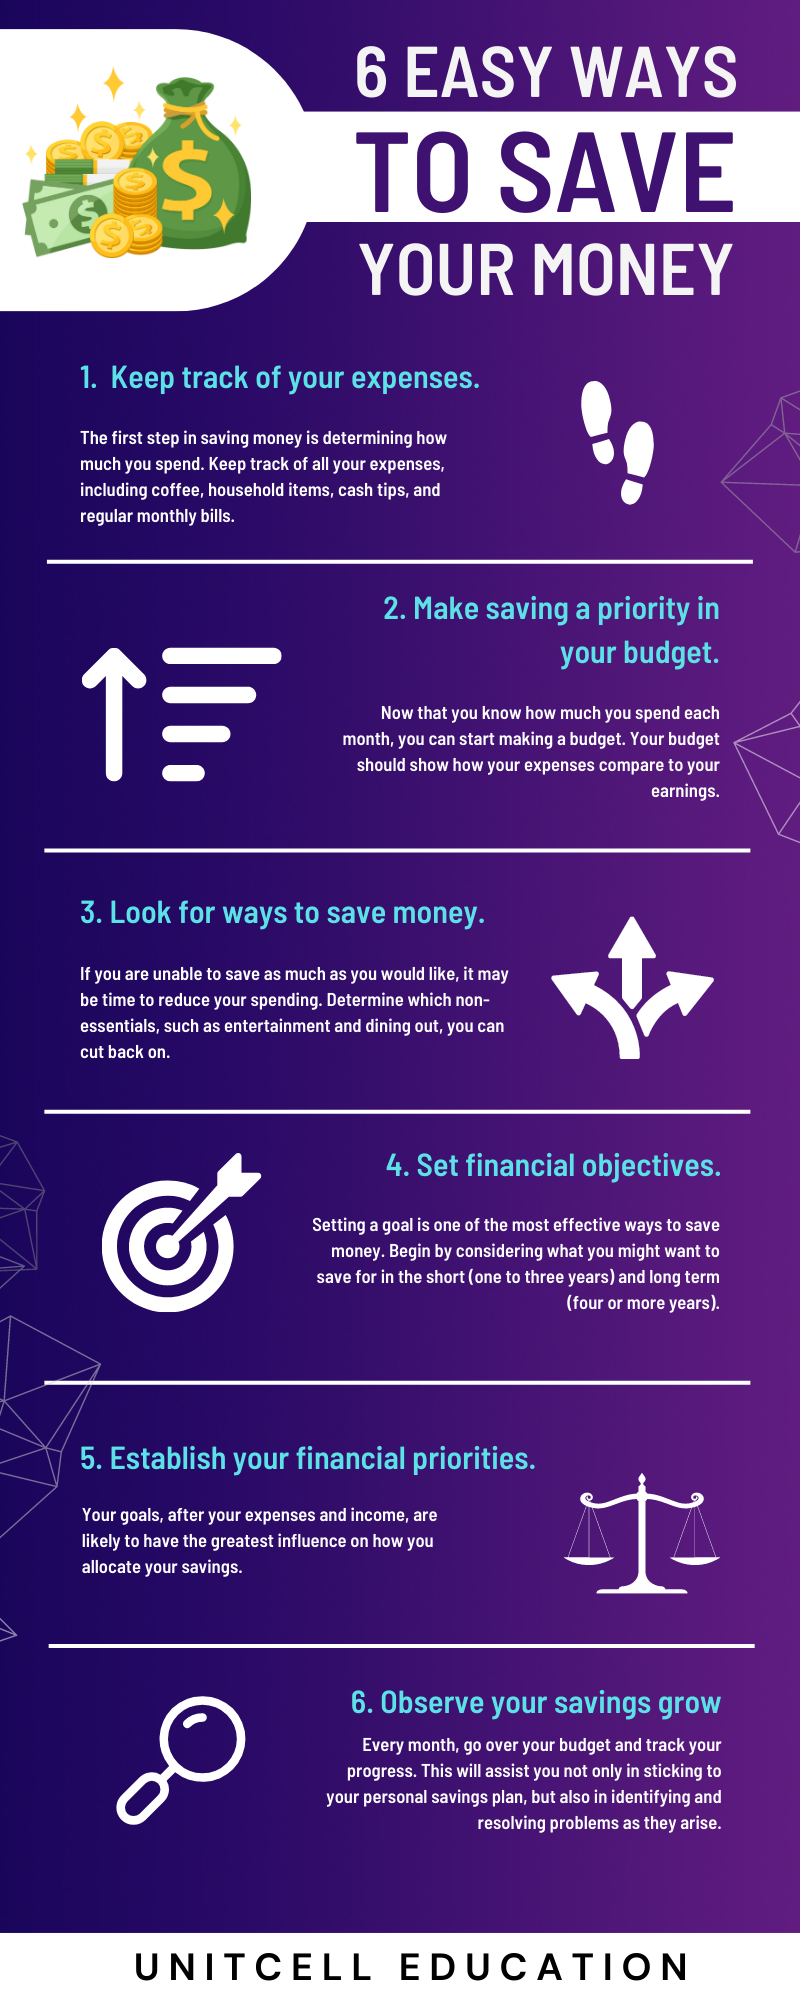 6 easy ways to save your money